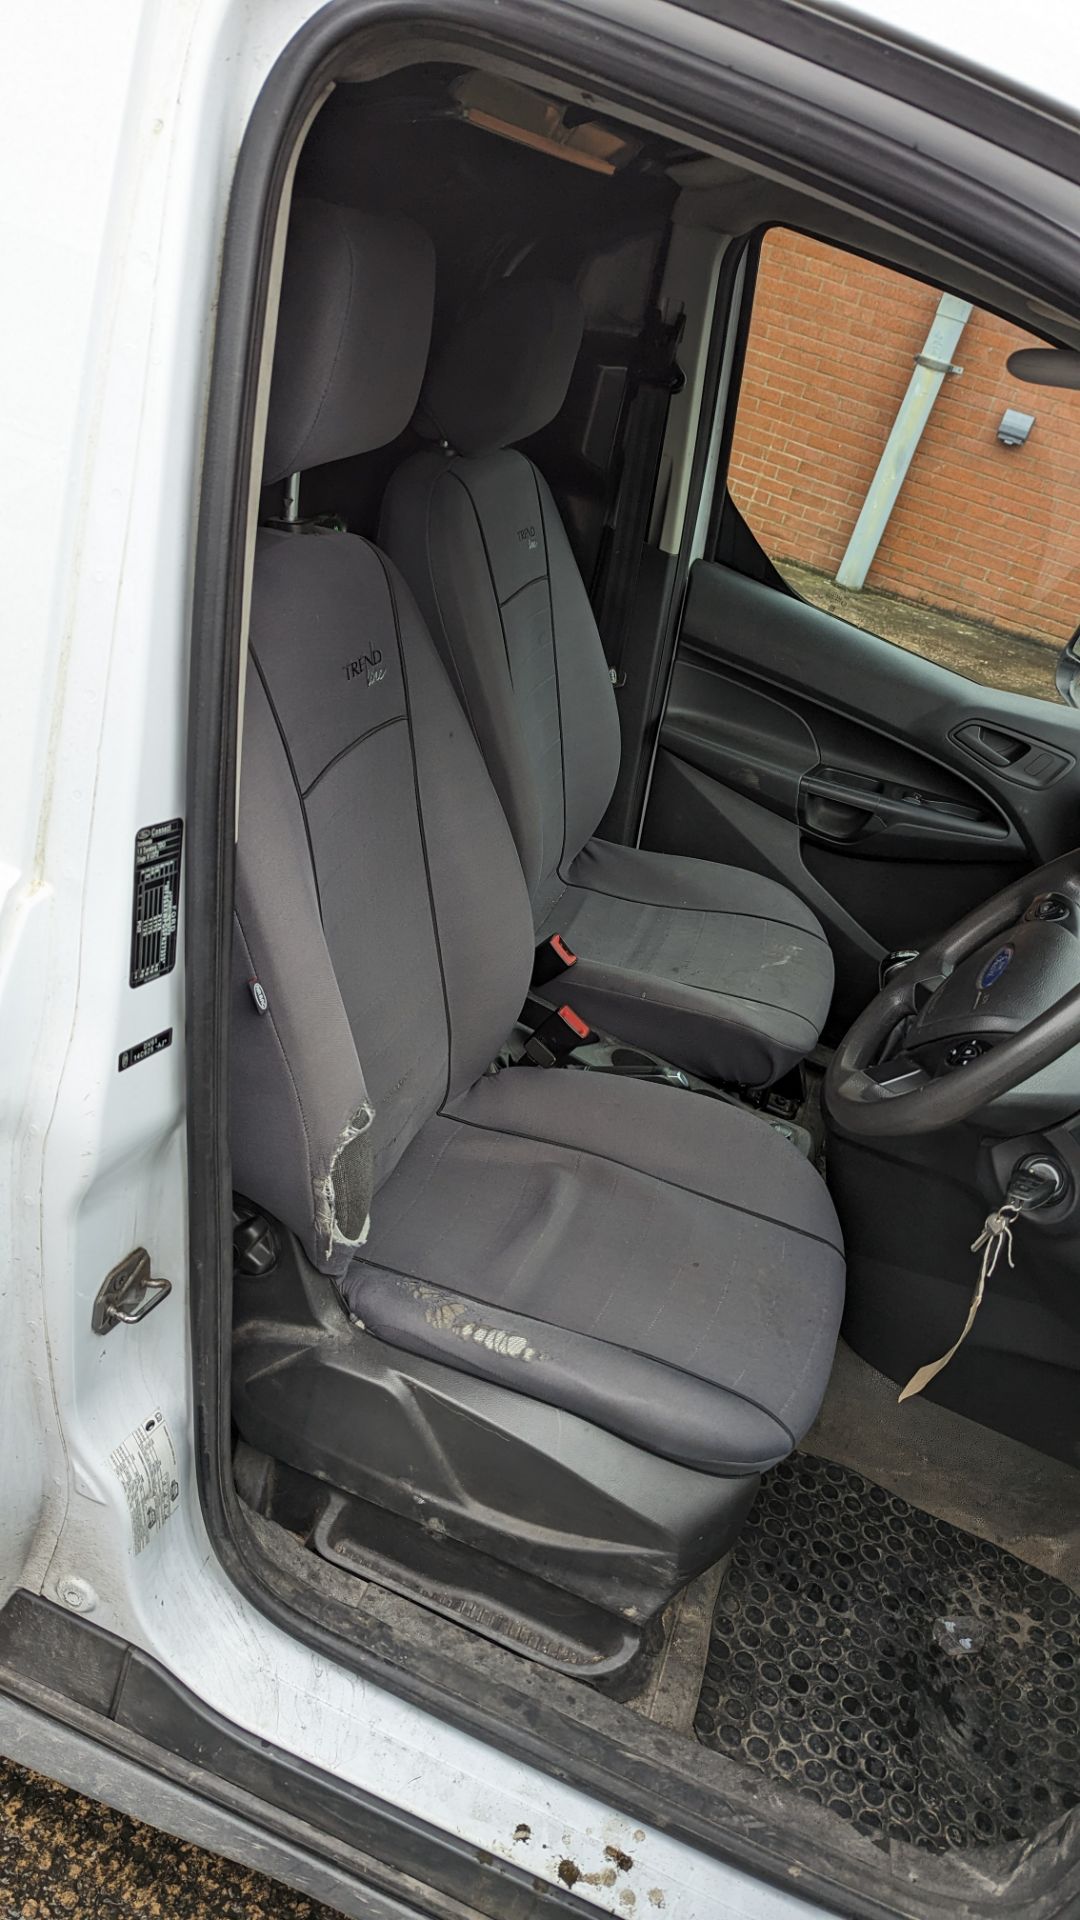 2015 Ford Transit Connect 210 ECO-TECH panel van - Image 17 of 18